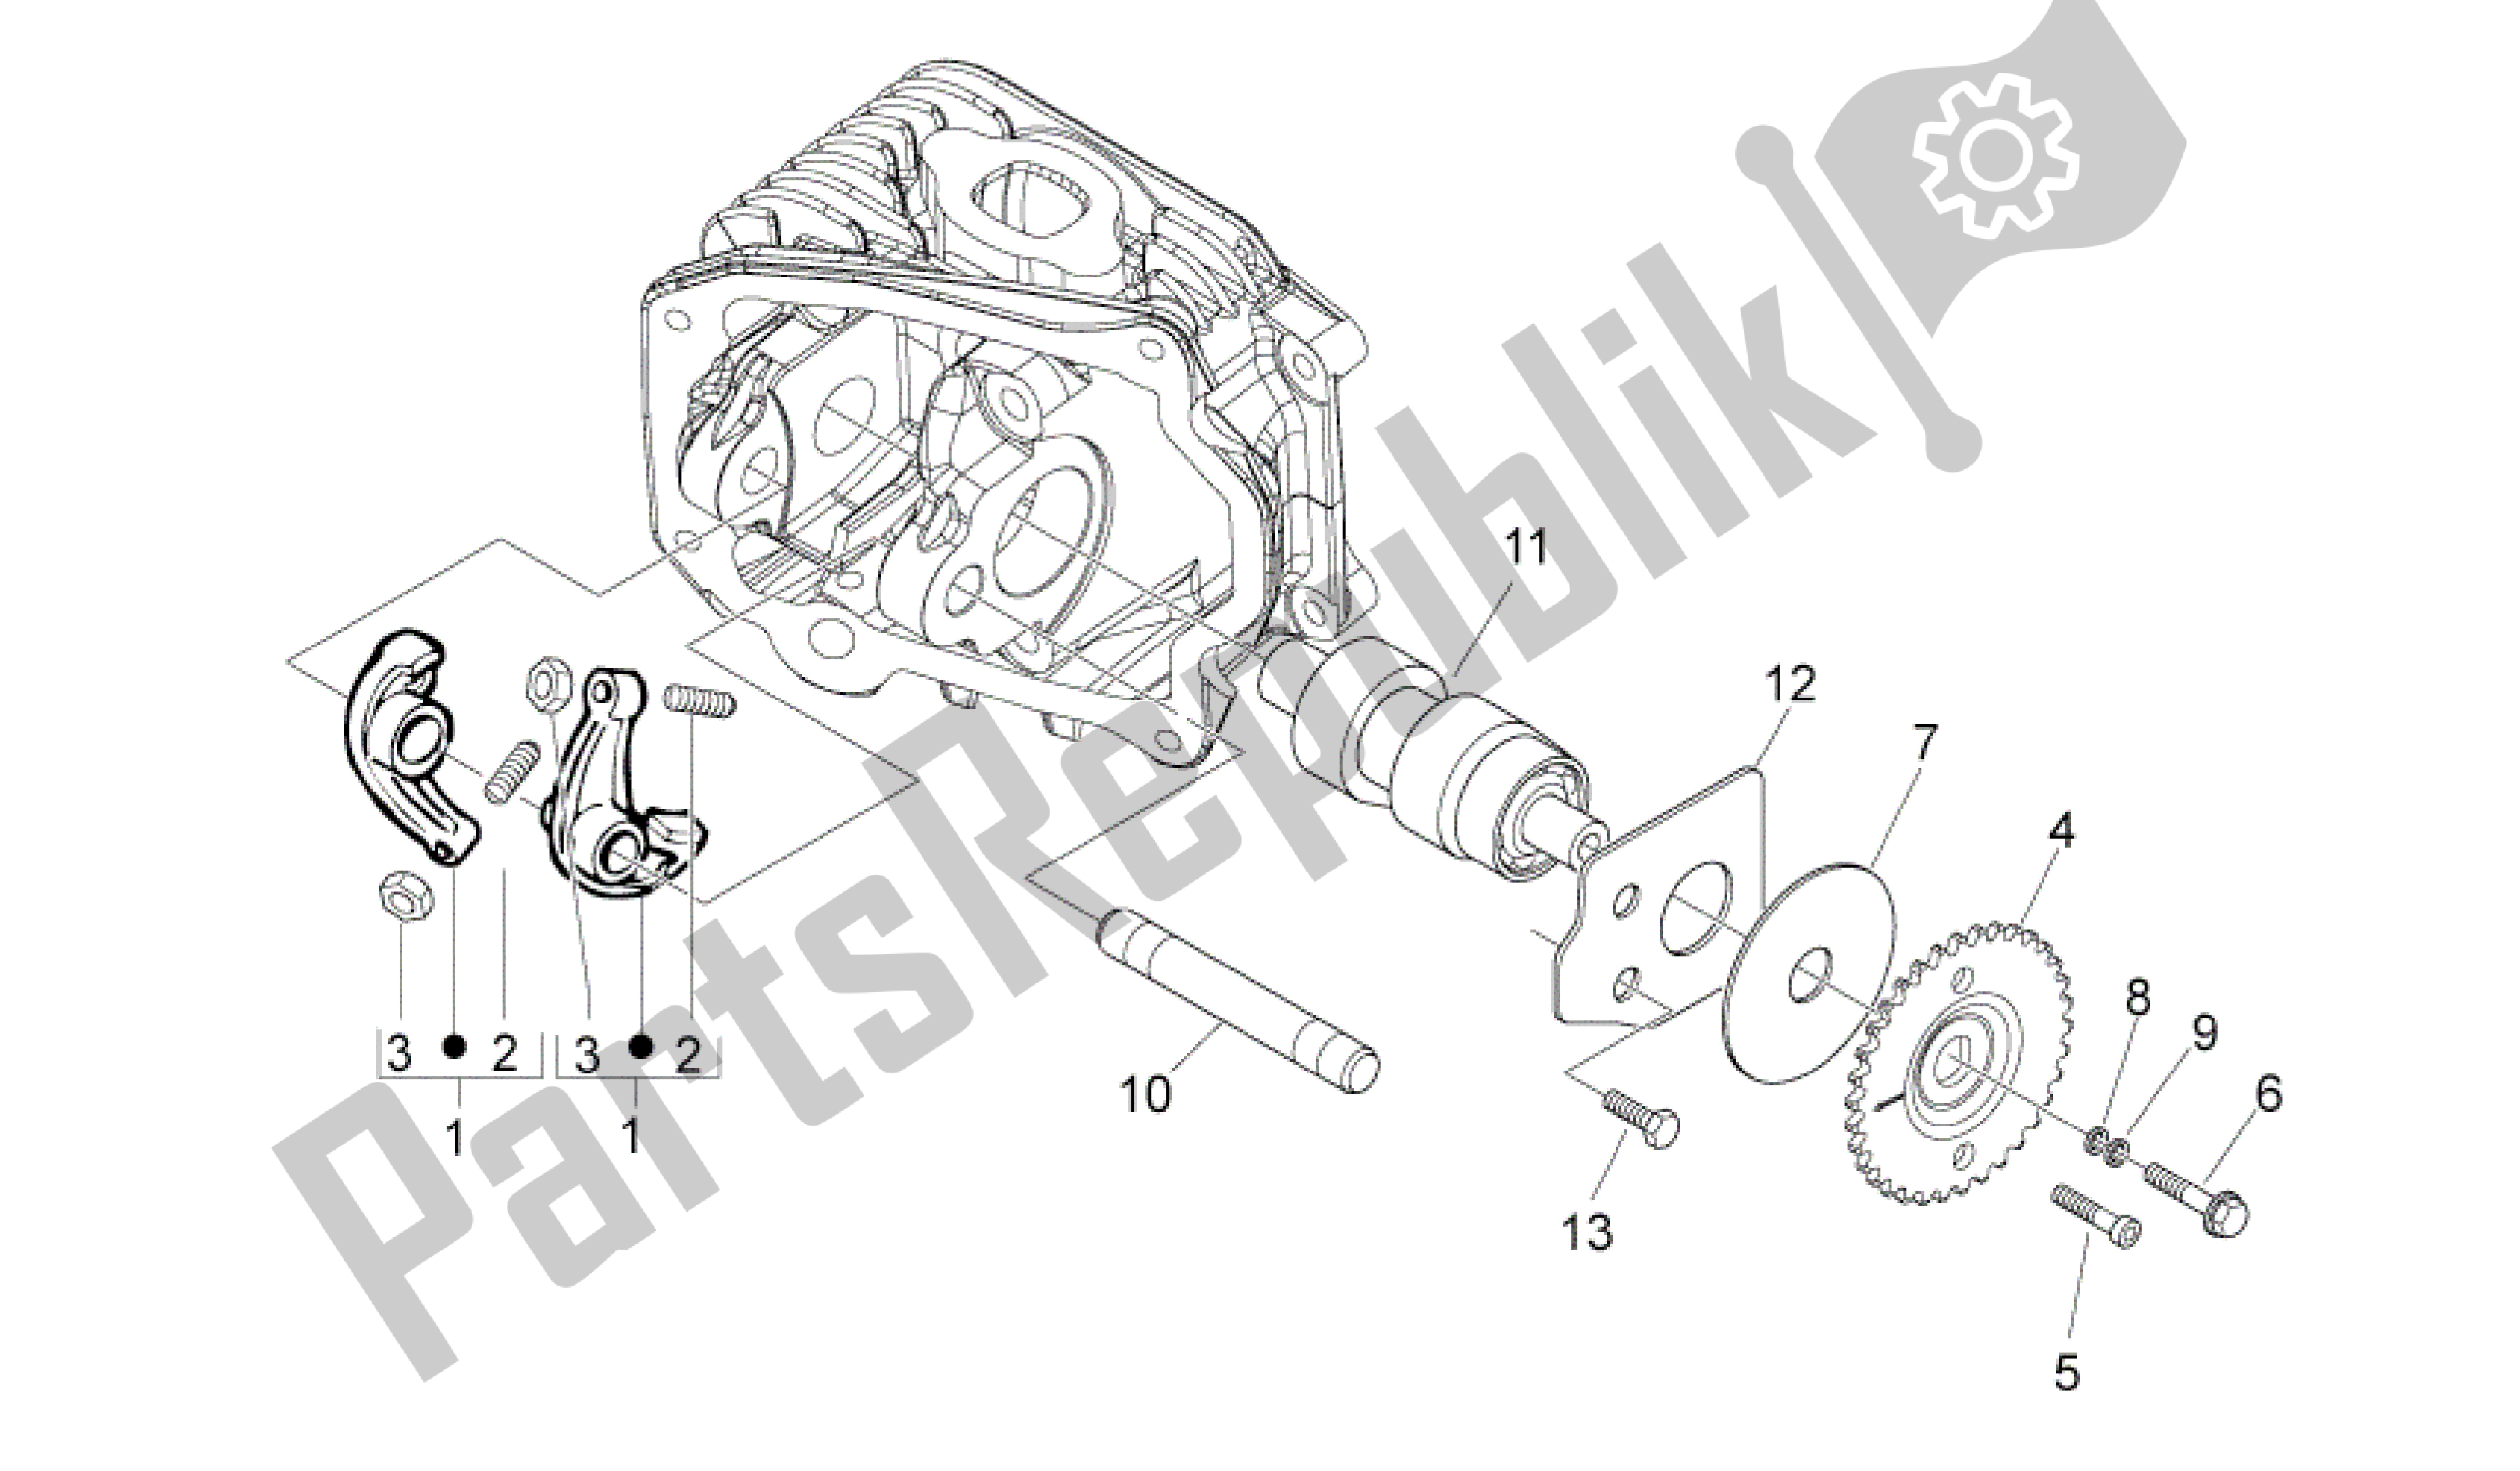 All parts for the Camshaft of the Aprilia Sport City 125 2008 - 2010